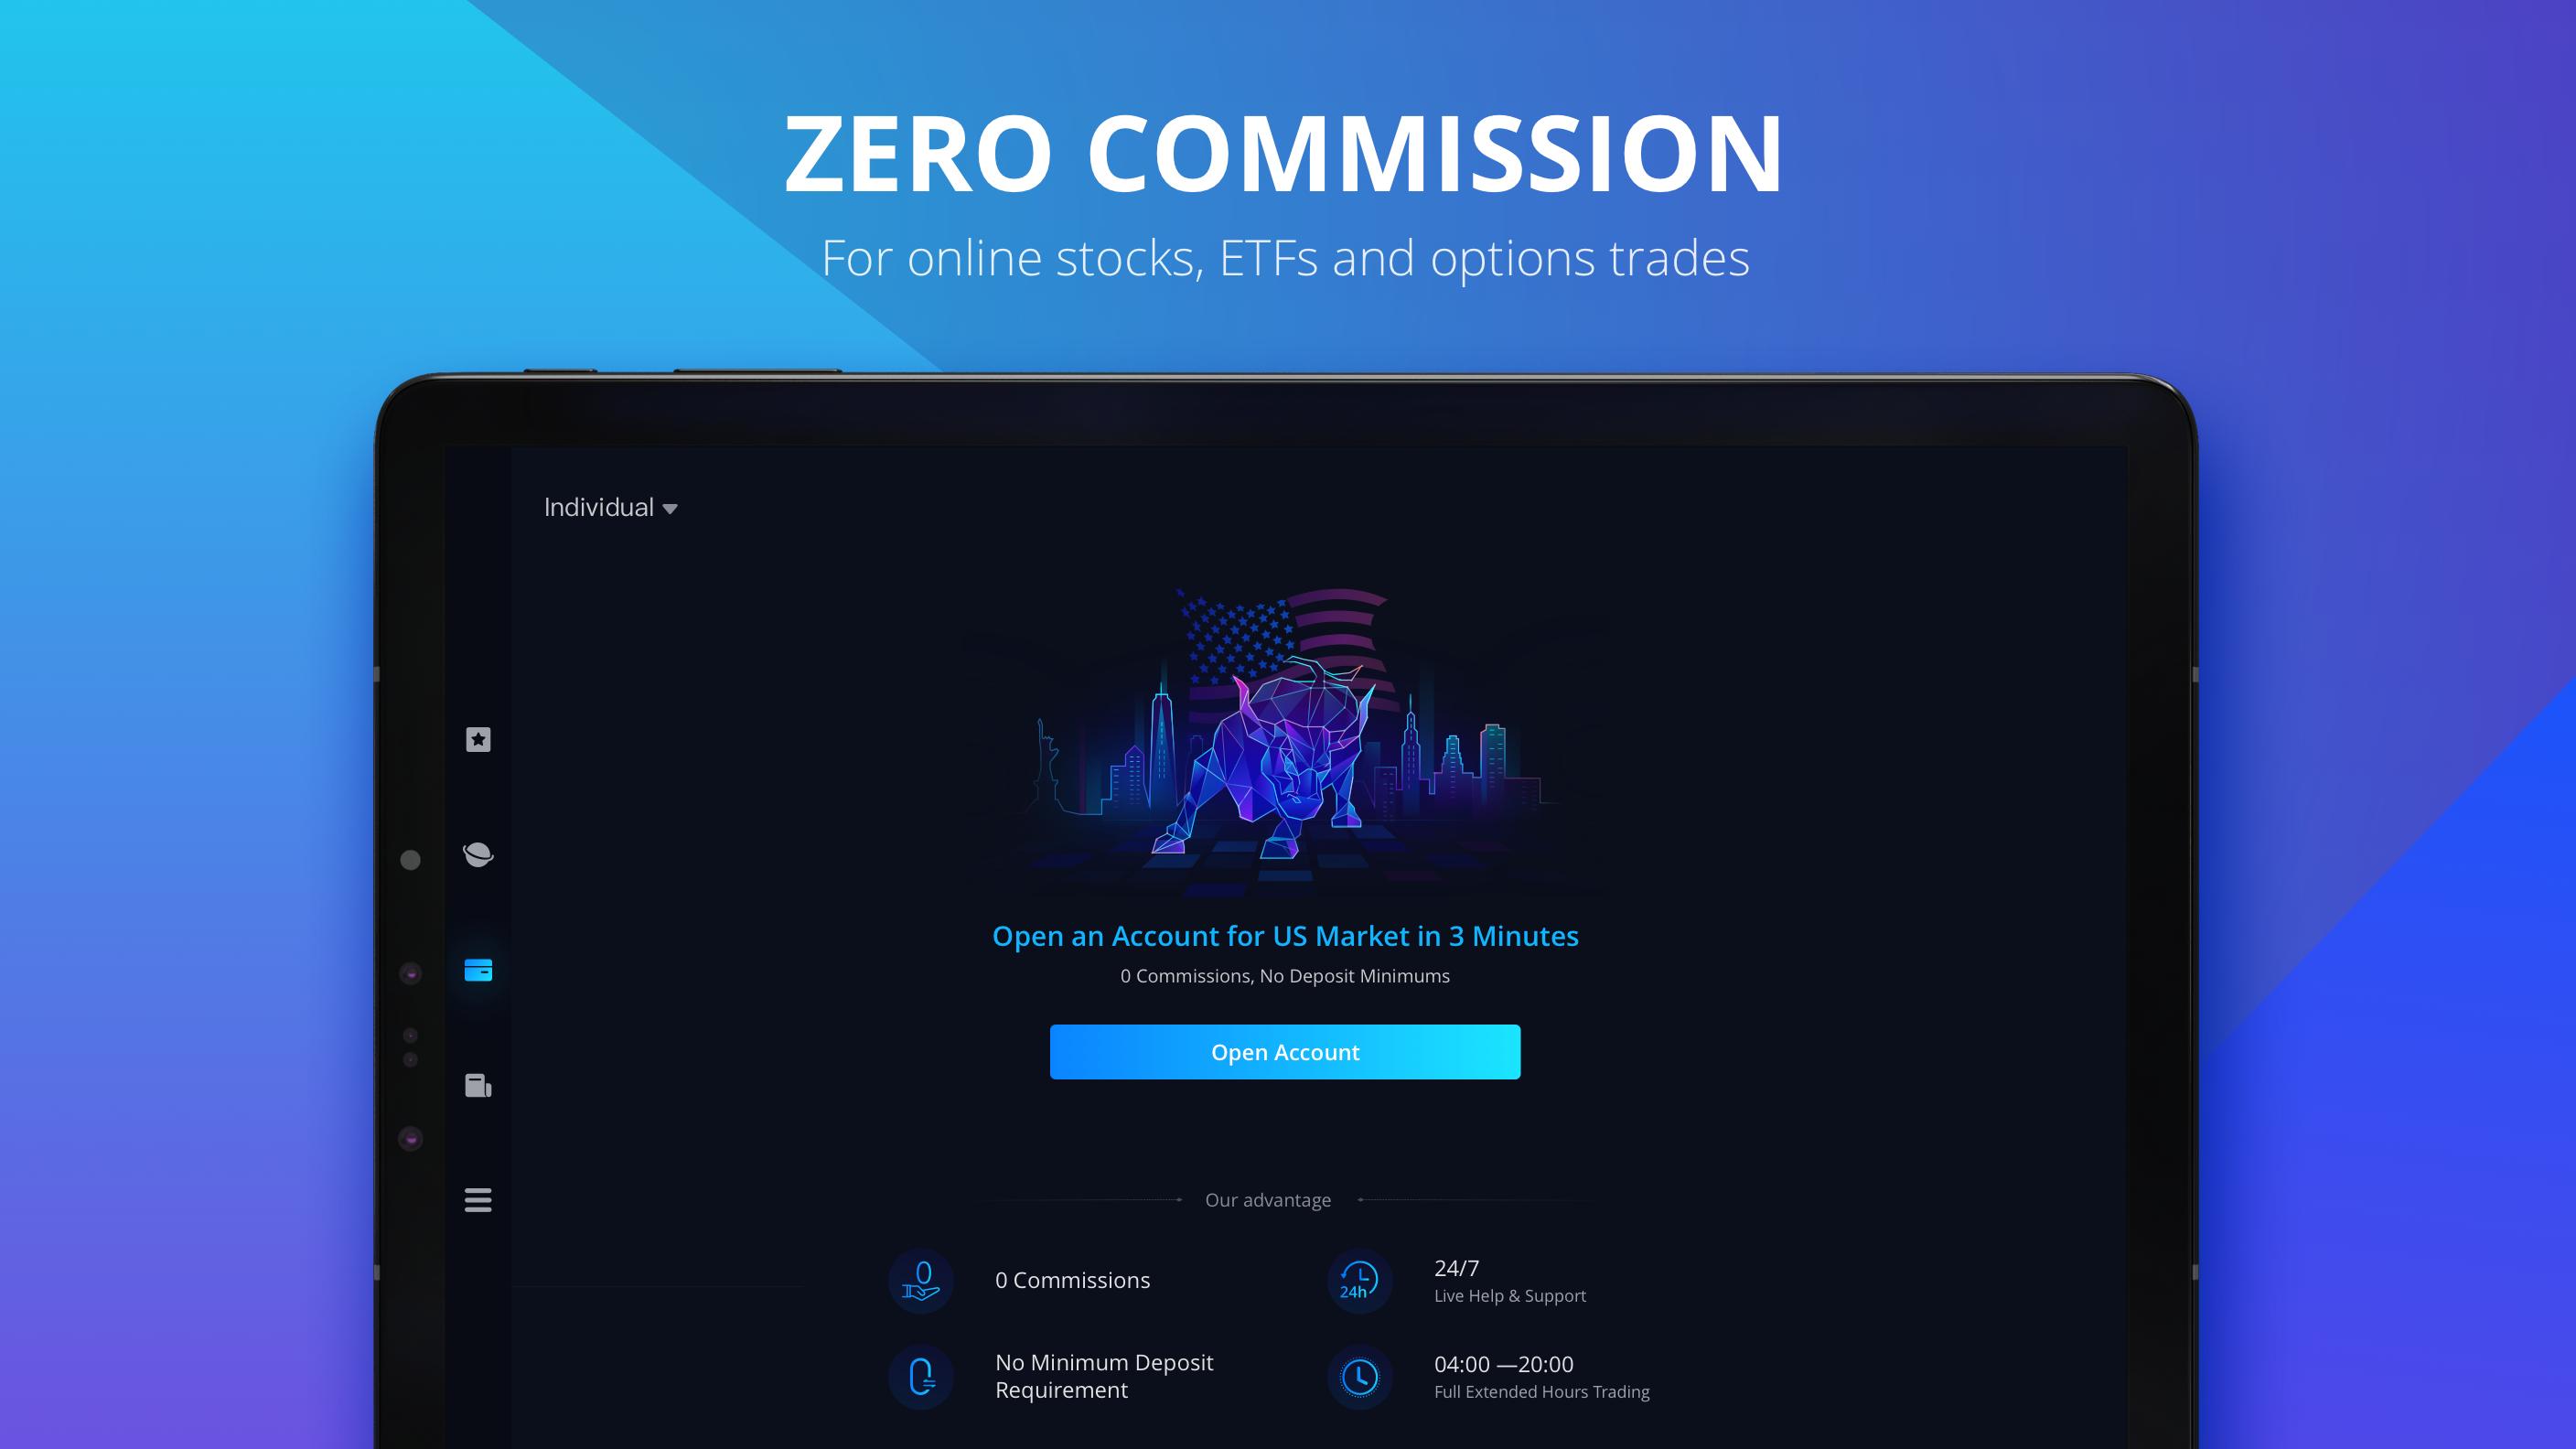 Webull Investing & Trading. All Commission Free 7.0.9.02 Screenshot 8